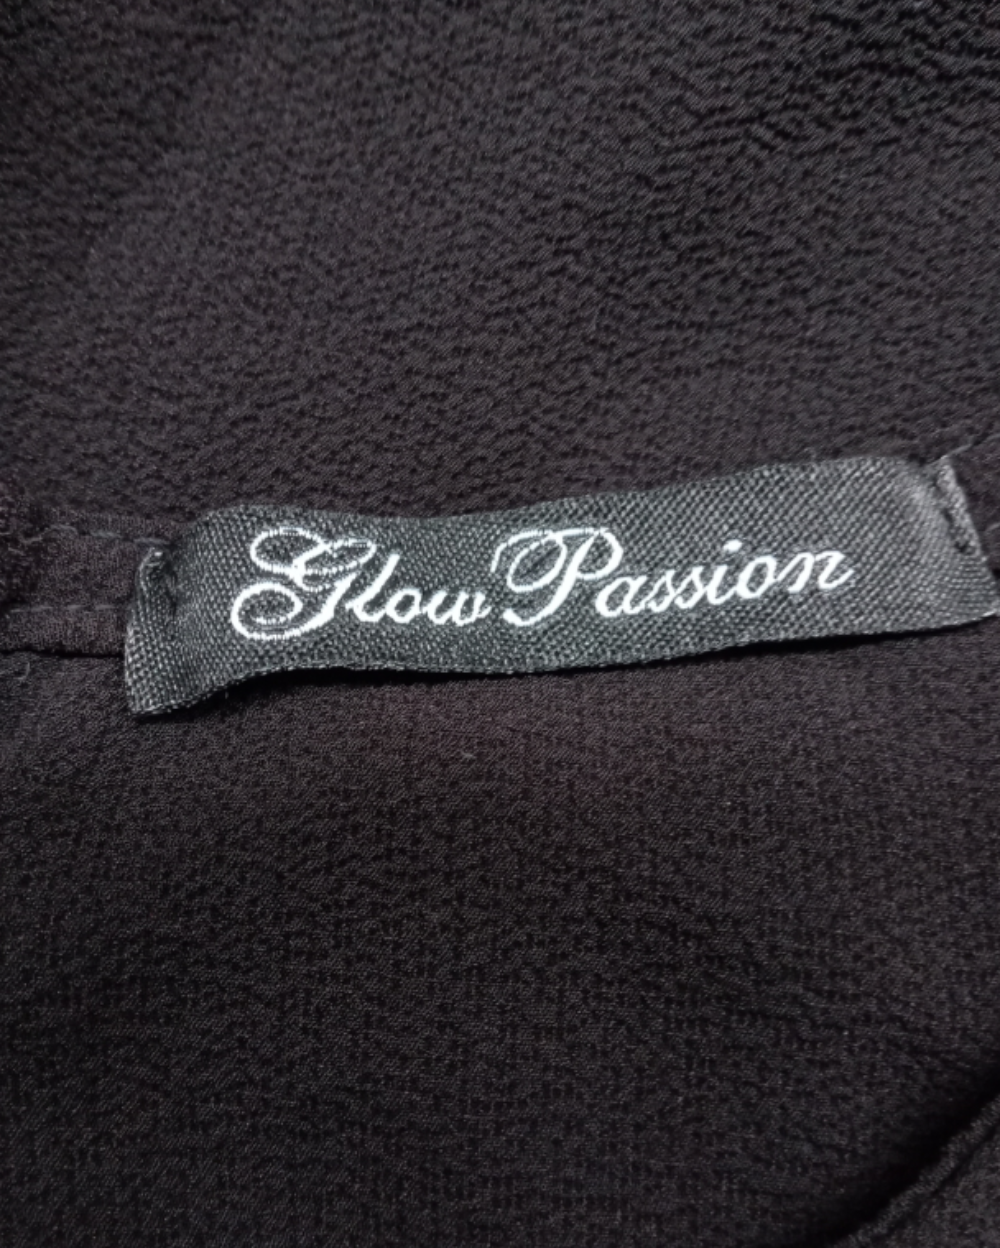 Blusas Casuales Glow passion 